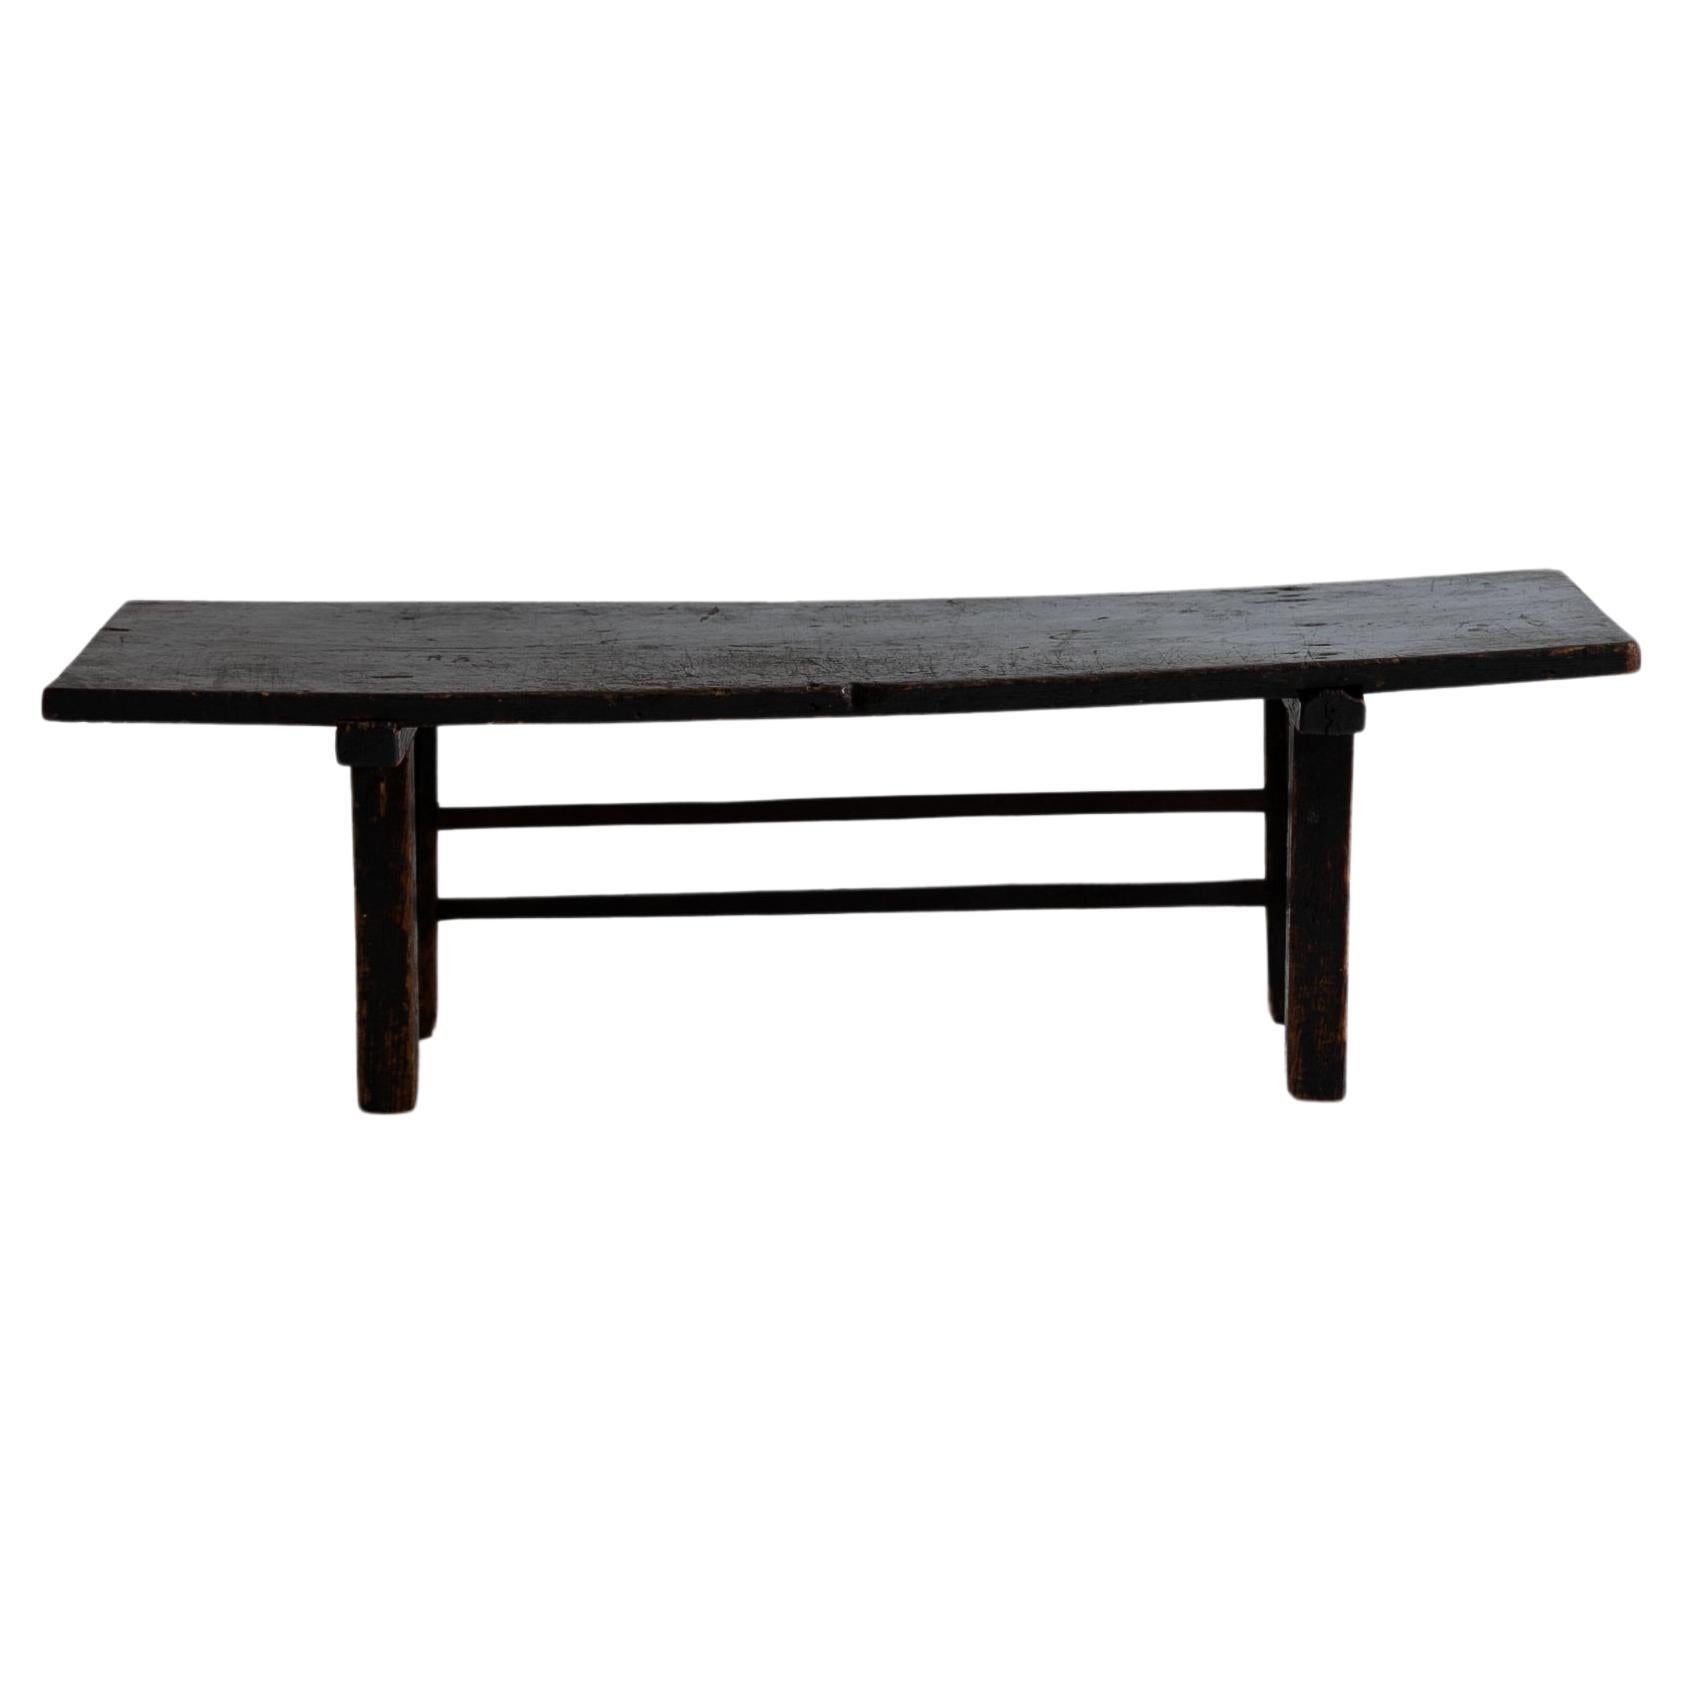 Japanese old wooden low table/ wabisabi coffee table/1850-1920 For Sale